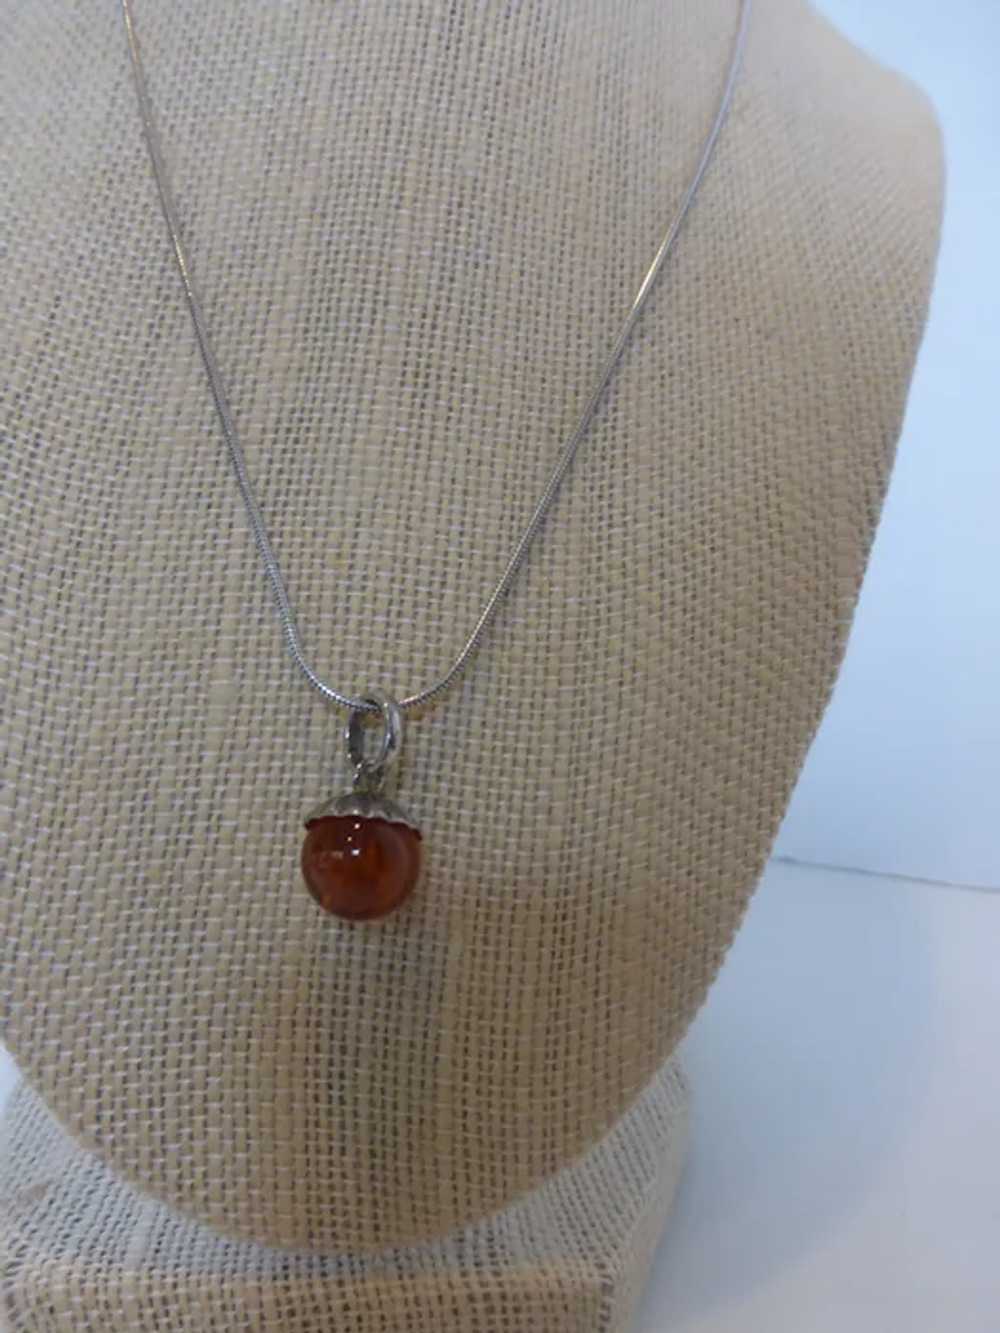 Amber Ball Sterling Silver Pendant Necklace - image 3